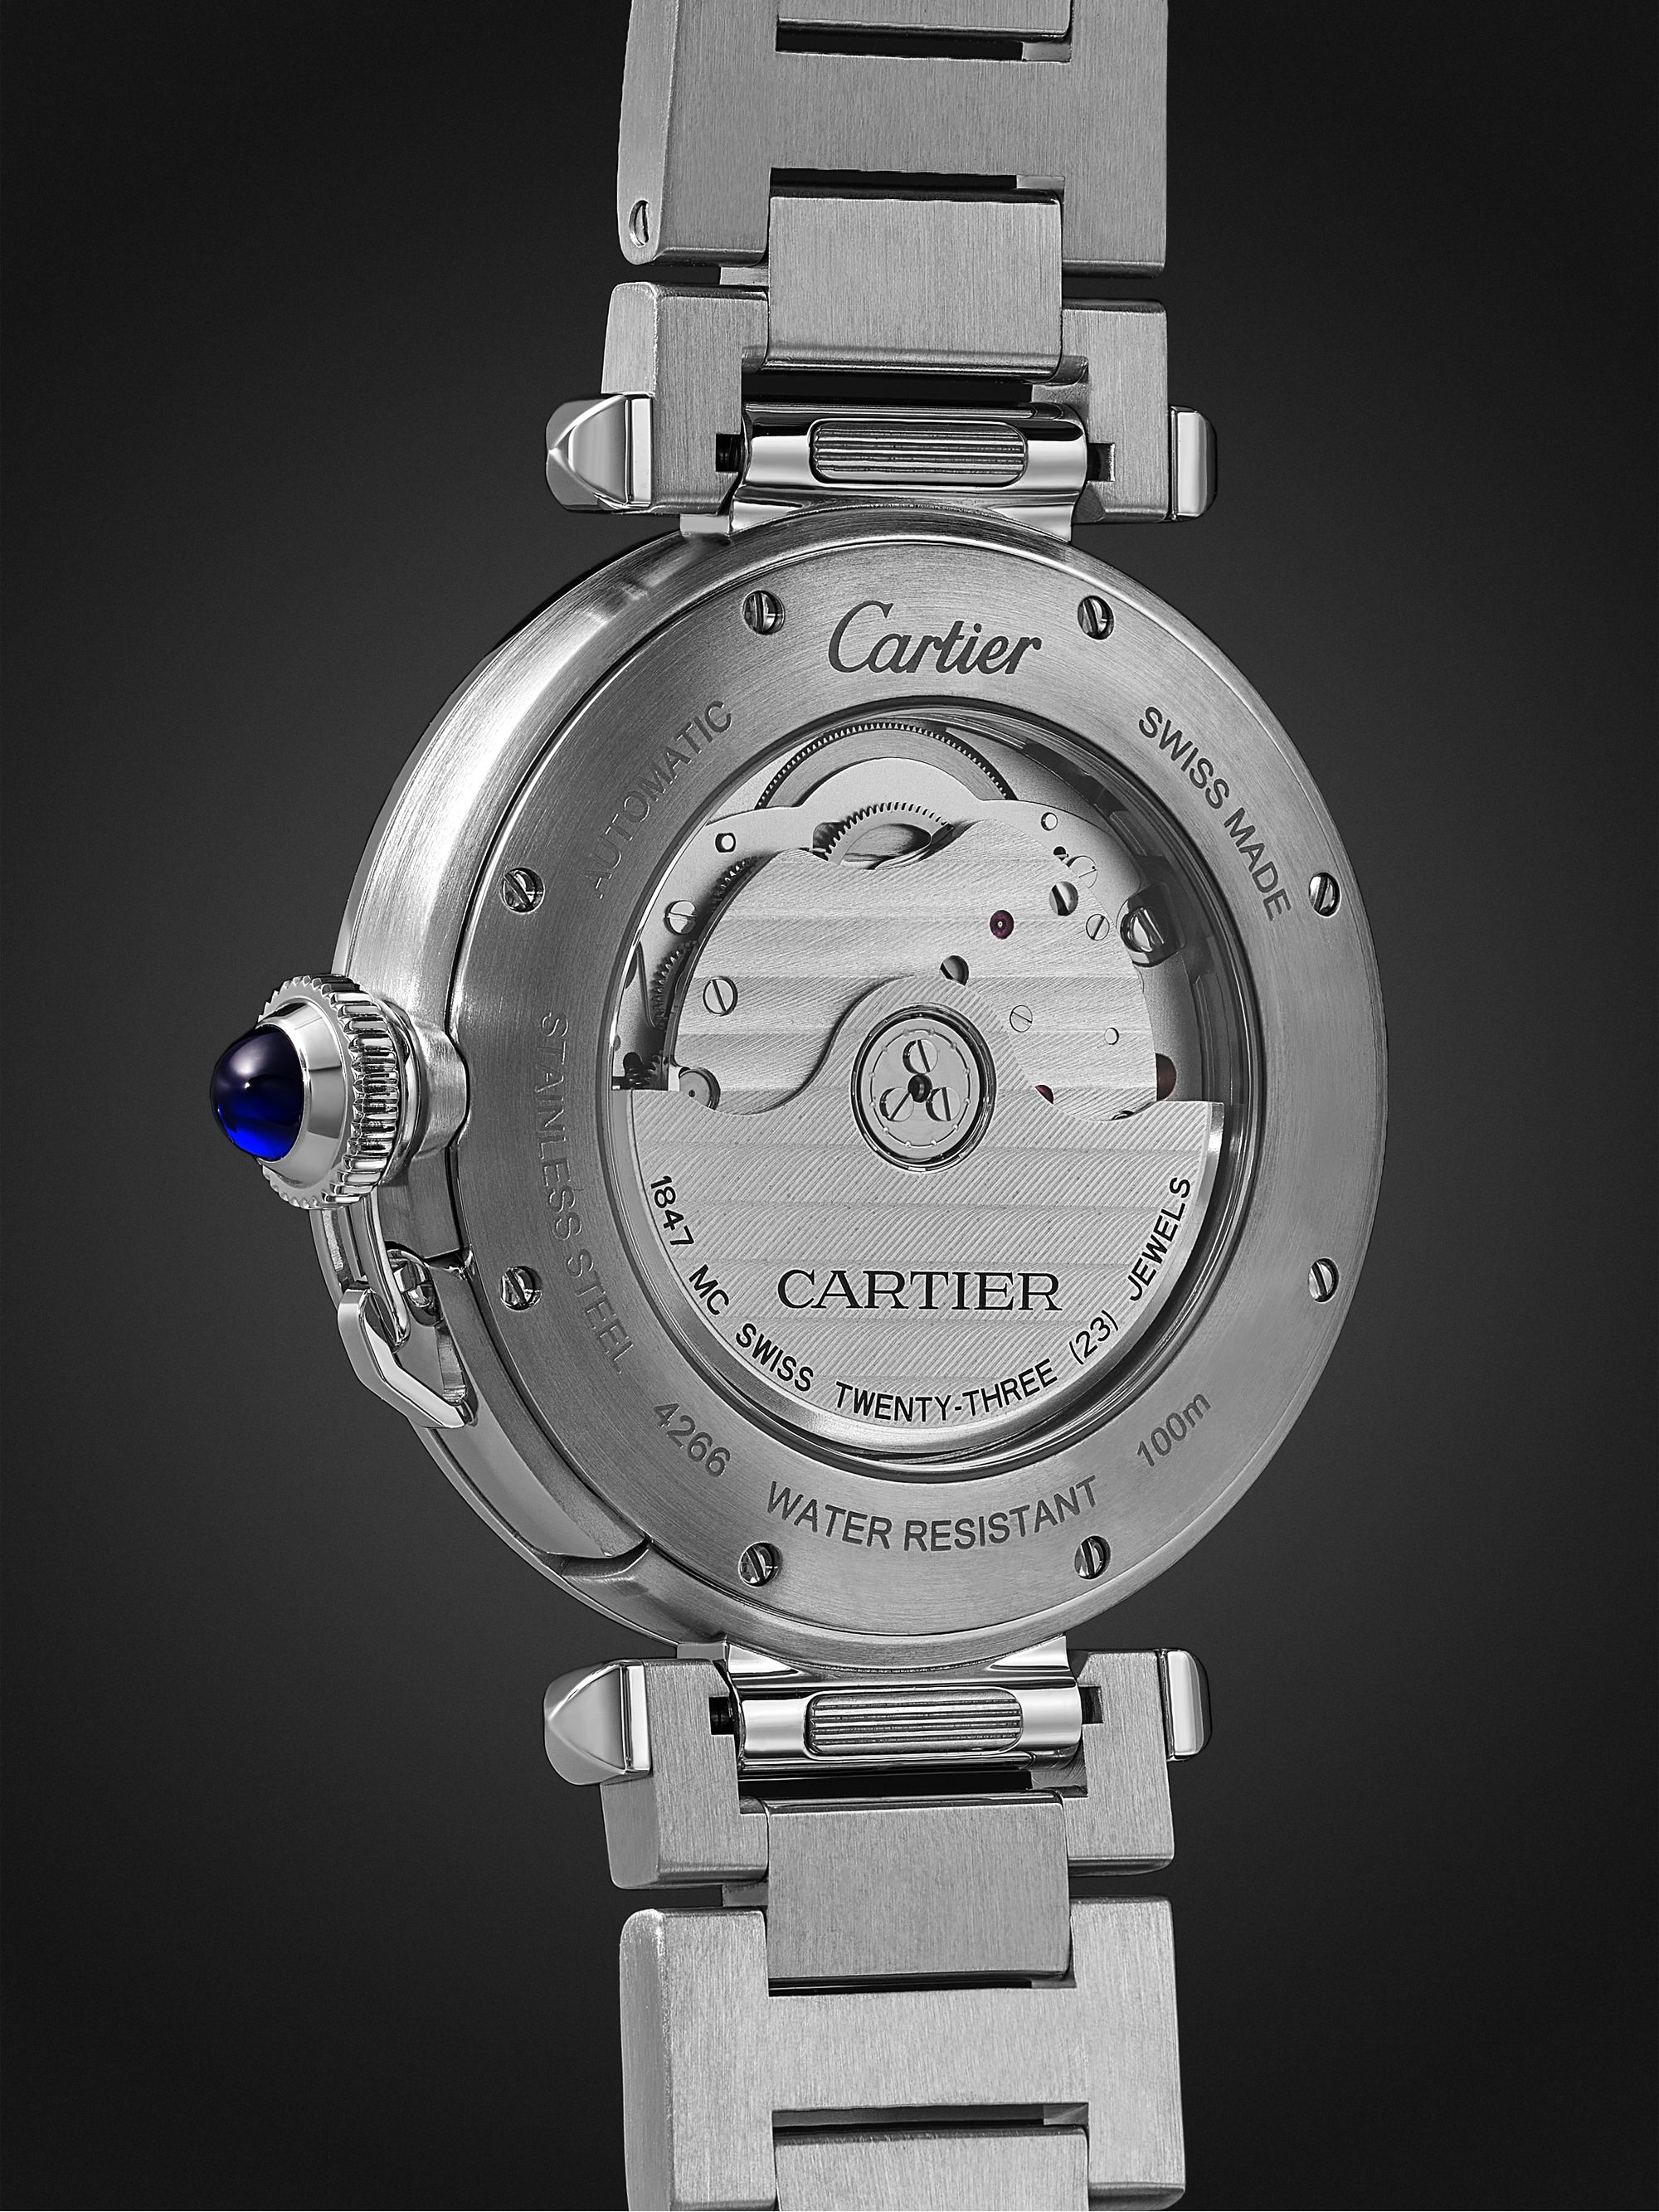 CARTIER Pasha de Cartier Automatic 41mm Stainless Steel and Alligator Watch, Ref. No. WSPA0026